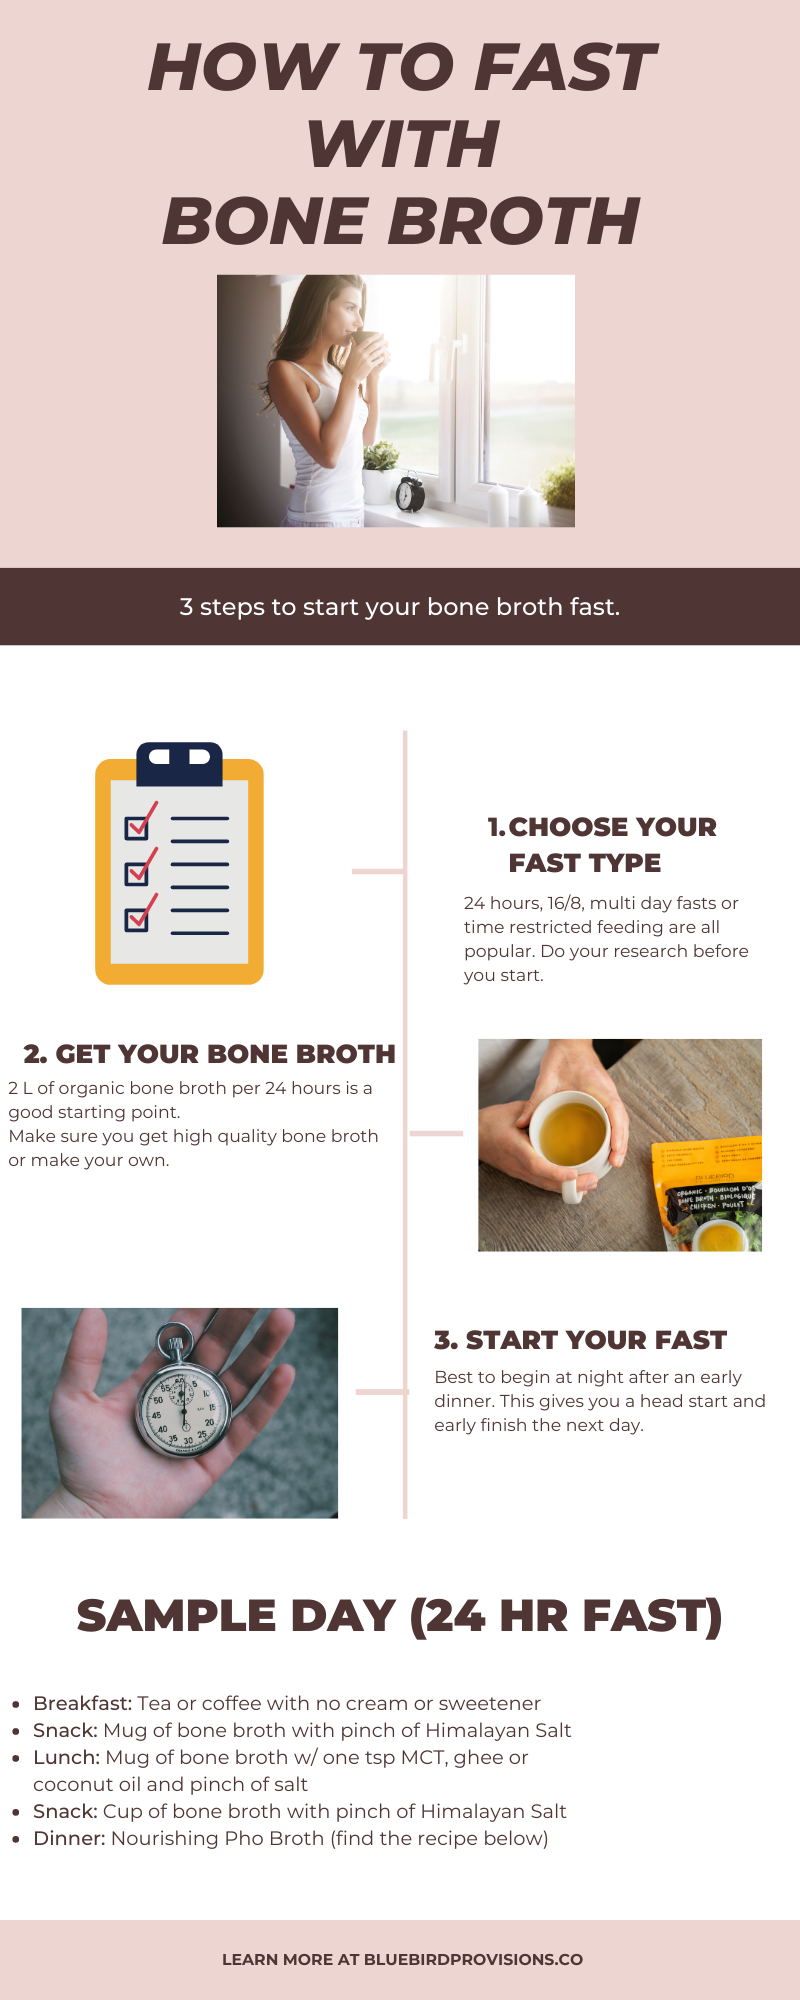 Fasting with Bone Broth Infographic